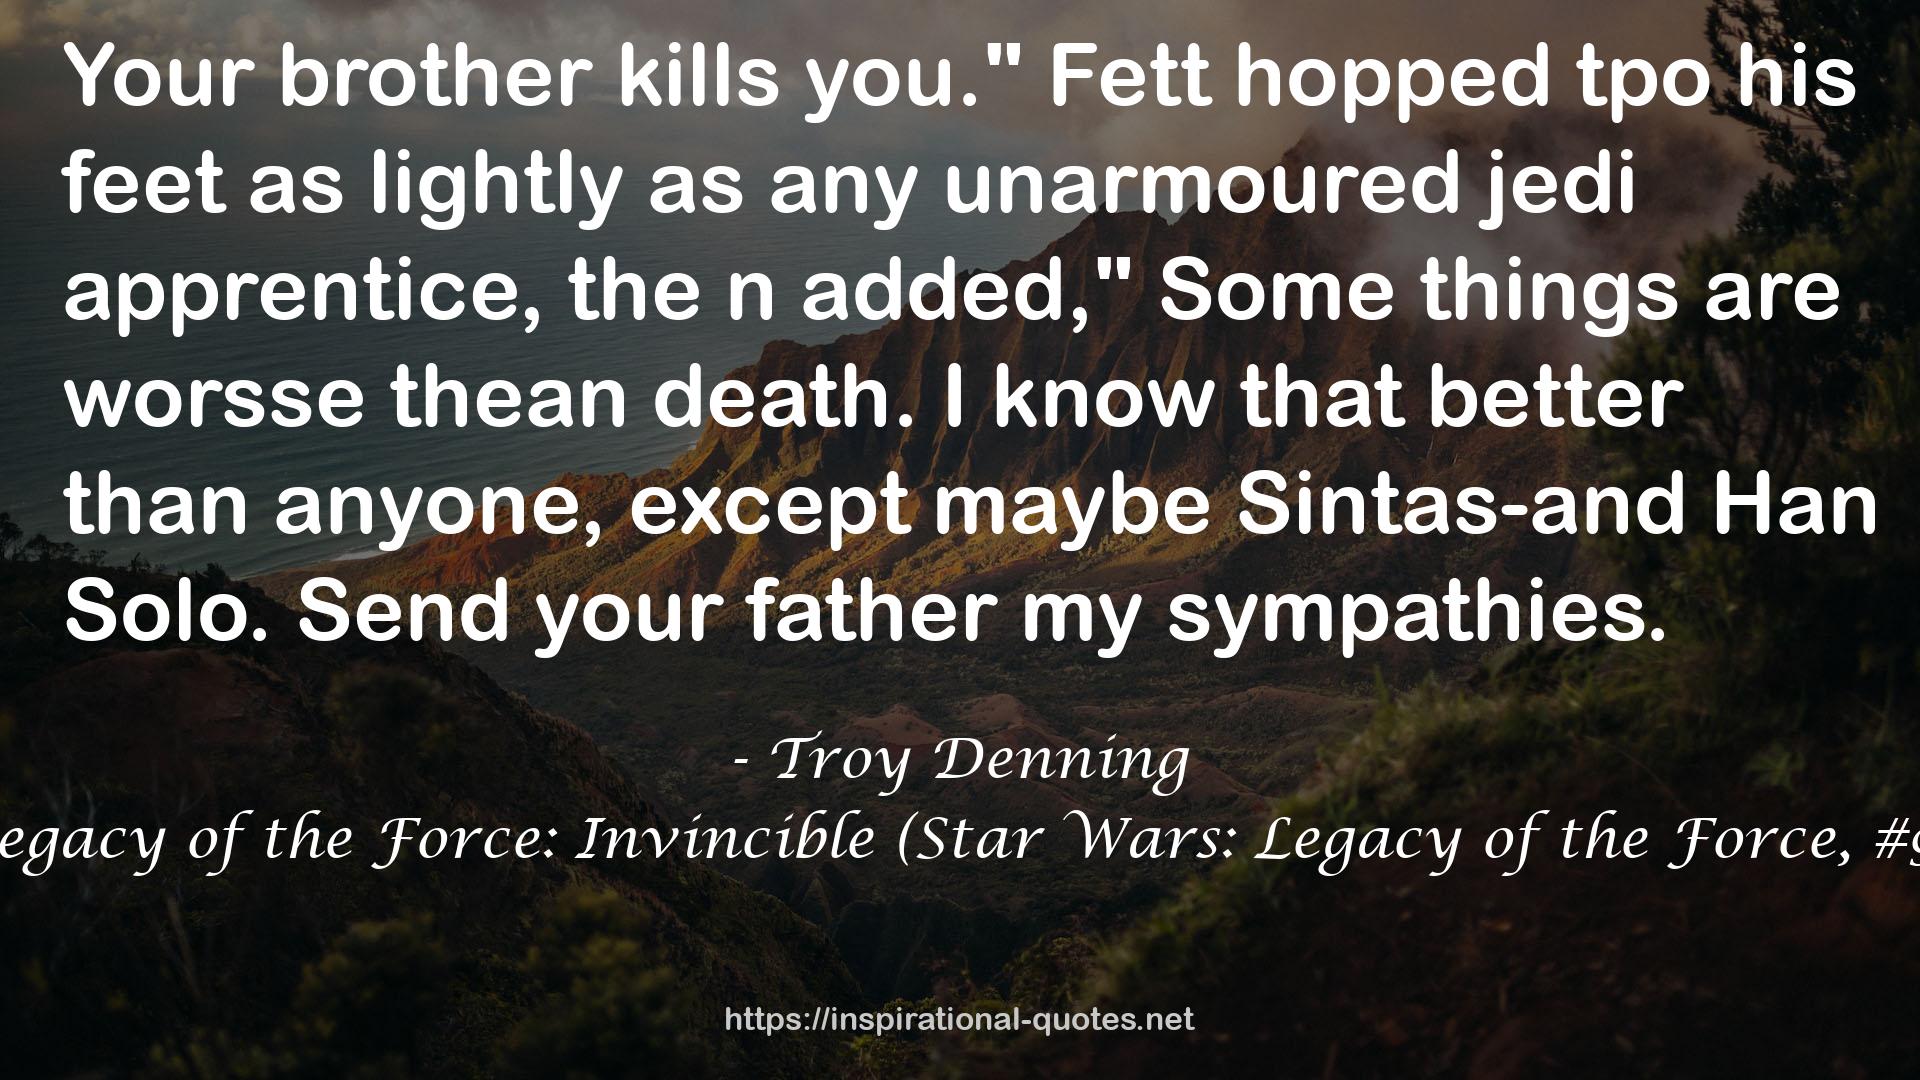 Legacy of the Force: Invincible (Star Wars: Legacy of the Force, #9) QUOTES